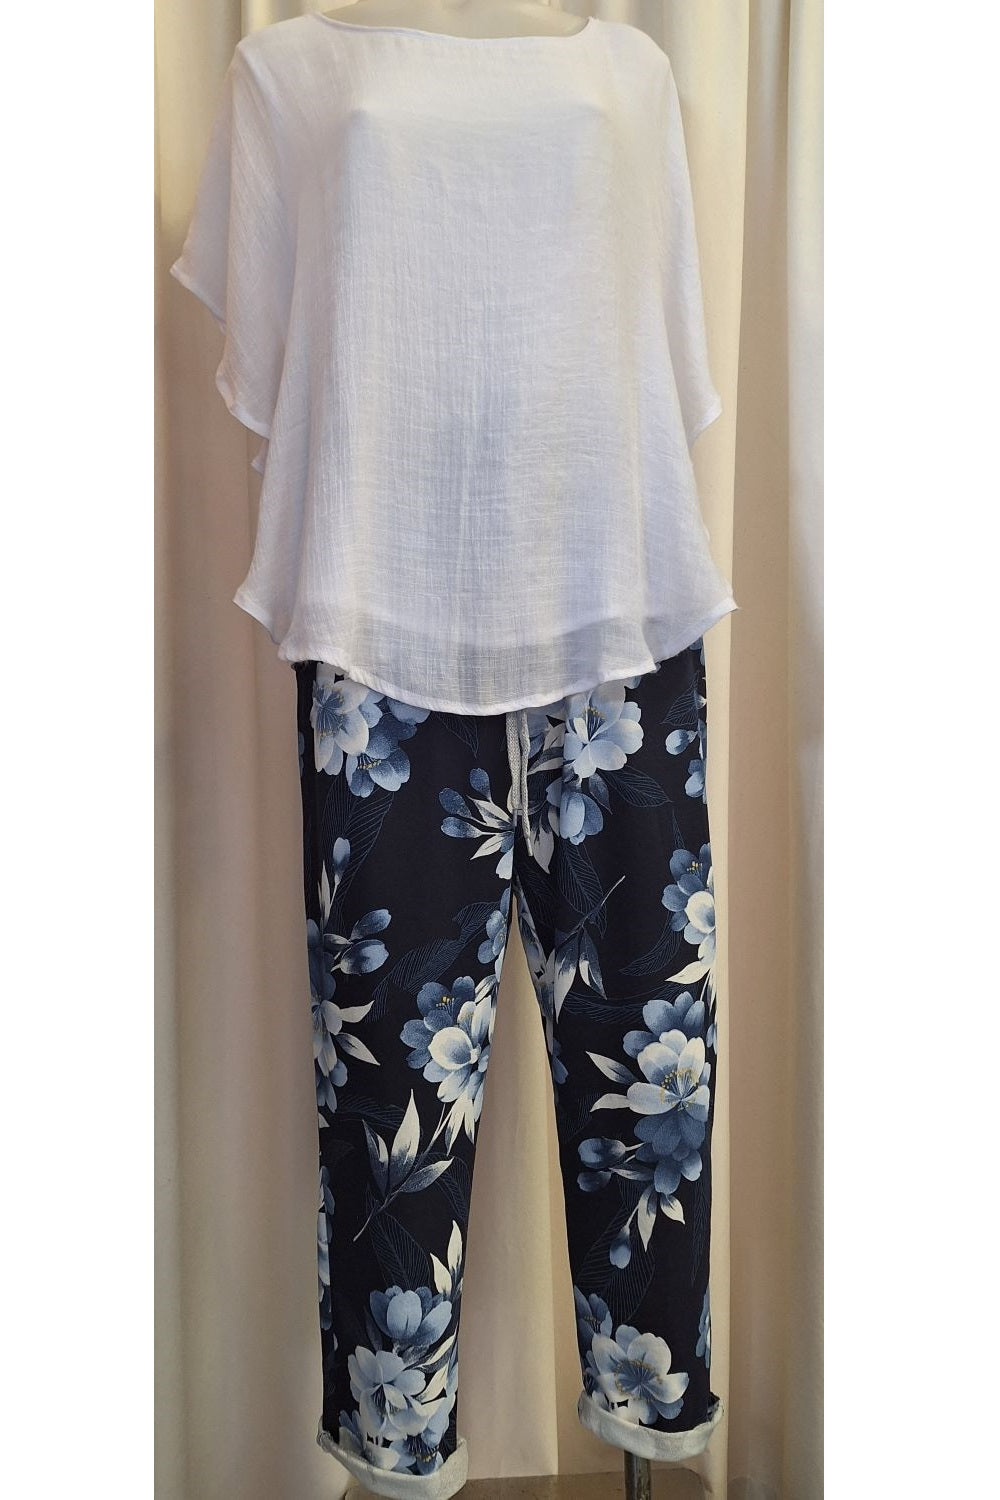 Italian Stretch Pants – Navy, Blue and White Flowers